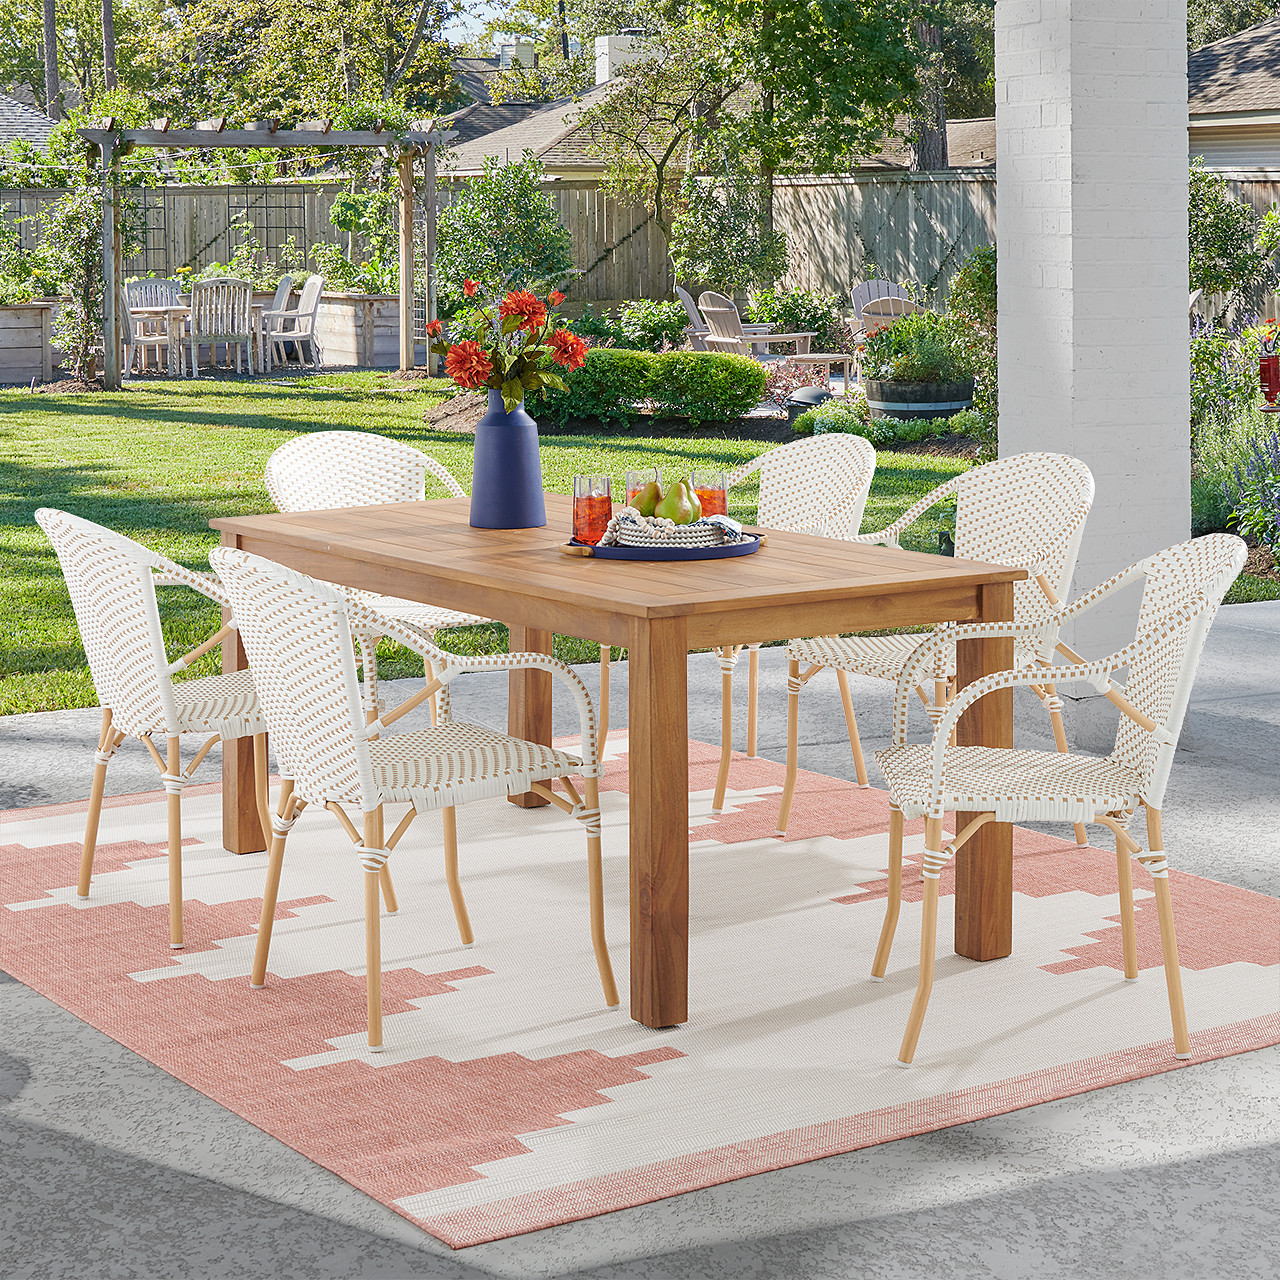 Parisian Cafe Cane Aluminum with Maple and White Outdoor Wicker 7 Arm Side Dining Set + 71 x 36 in. Teak Table